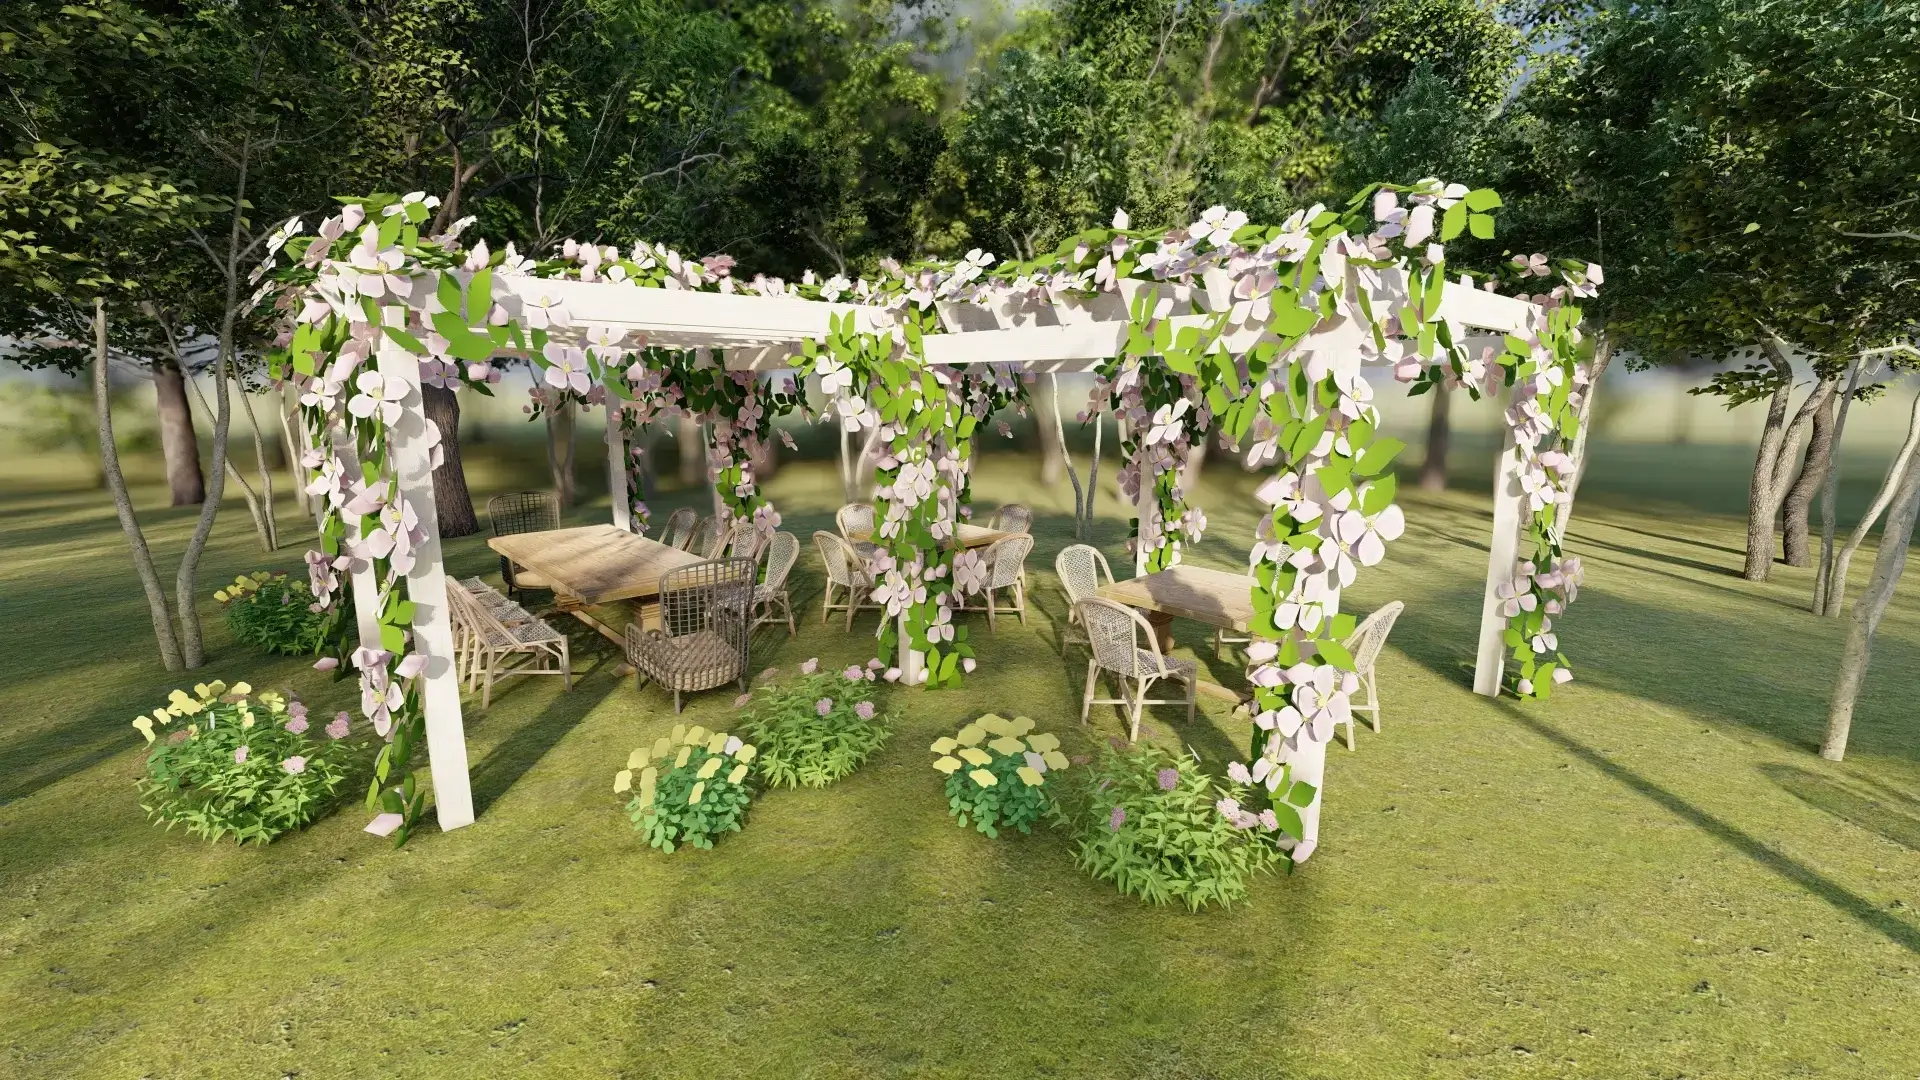 outdoor pergola with flowers and wooden chairs and tables on grass